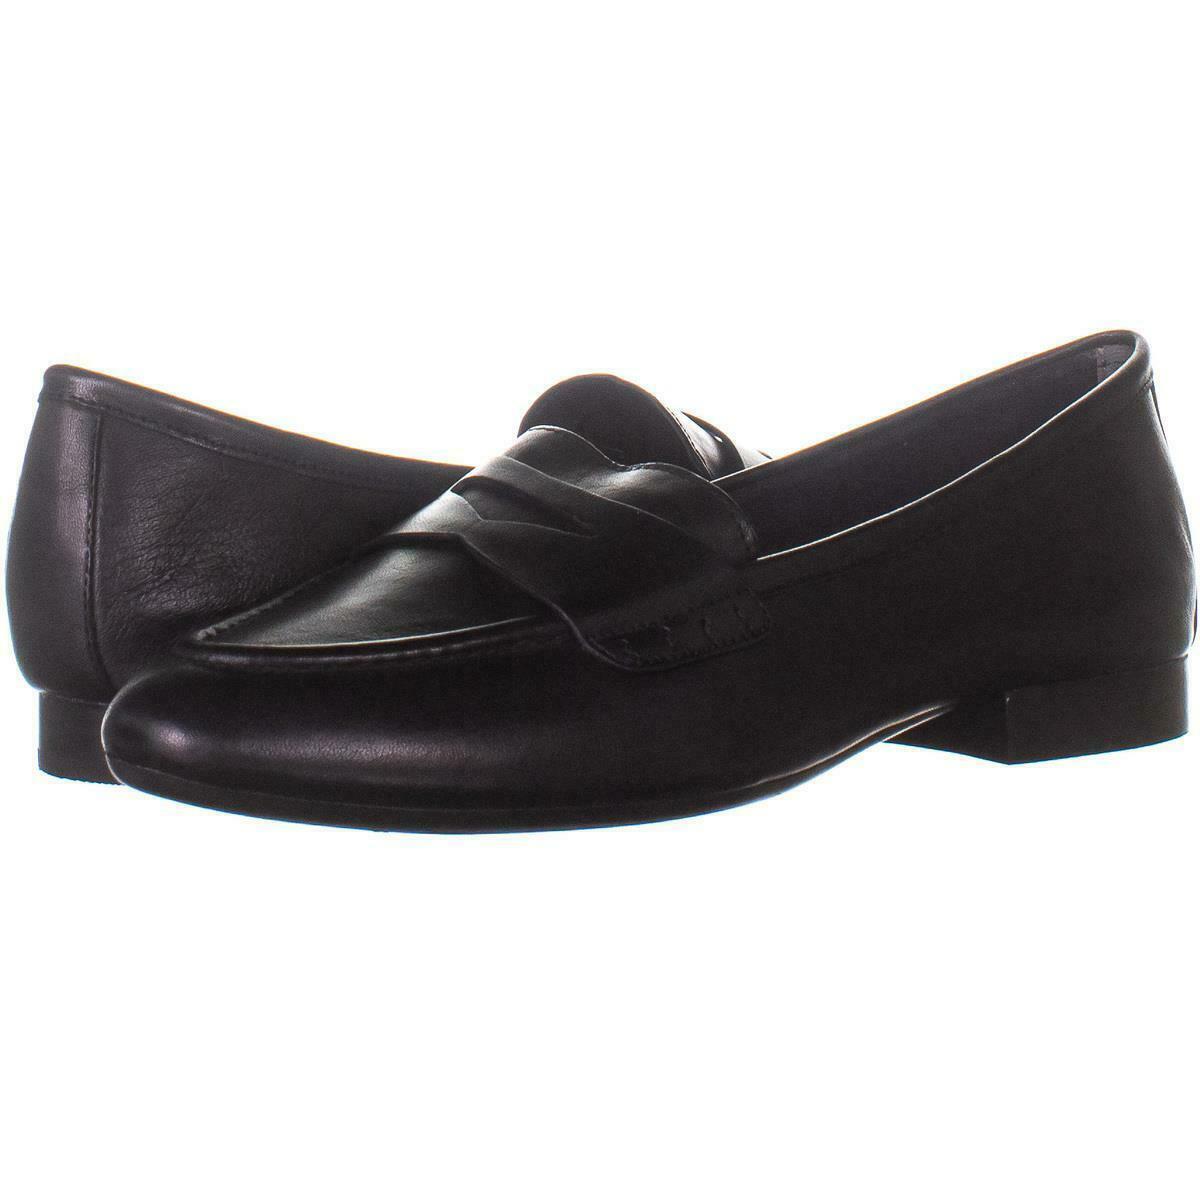 Aerosoles Map Out Slip On Loafers 601, Black Leather, 9 US - Flats ...